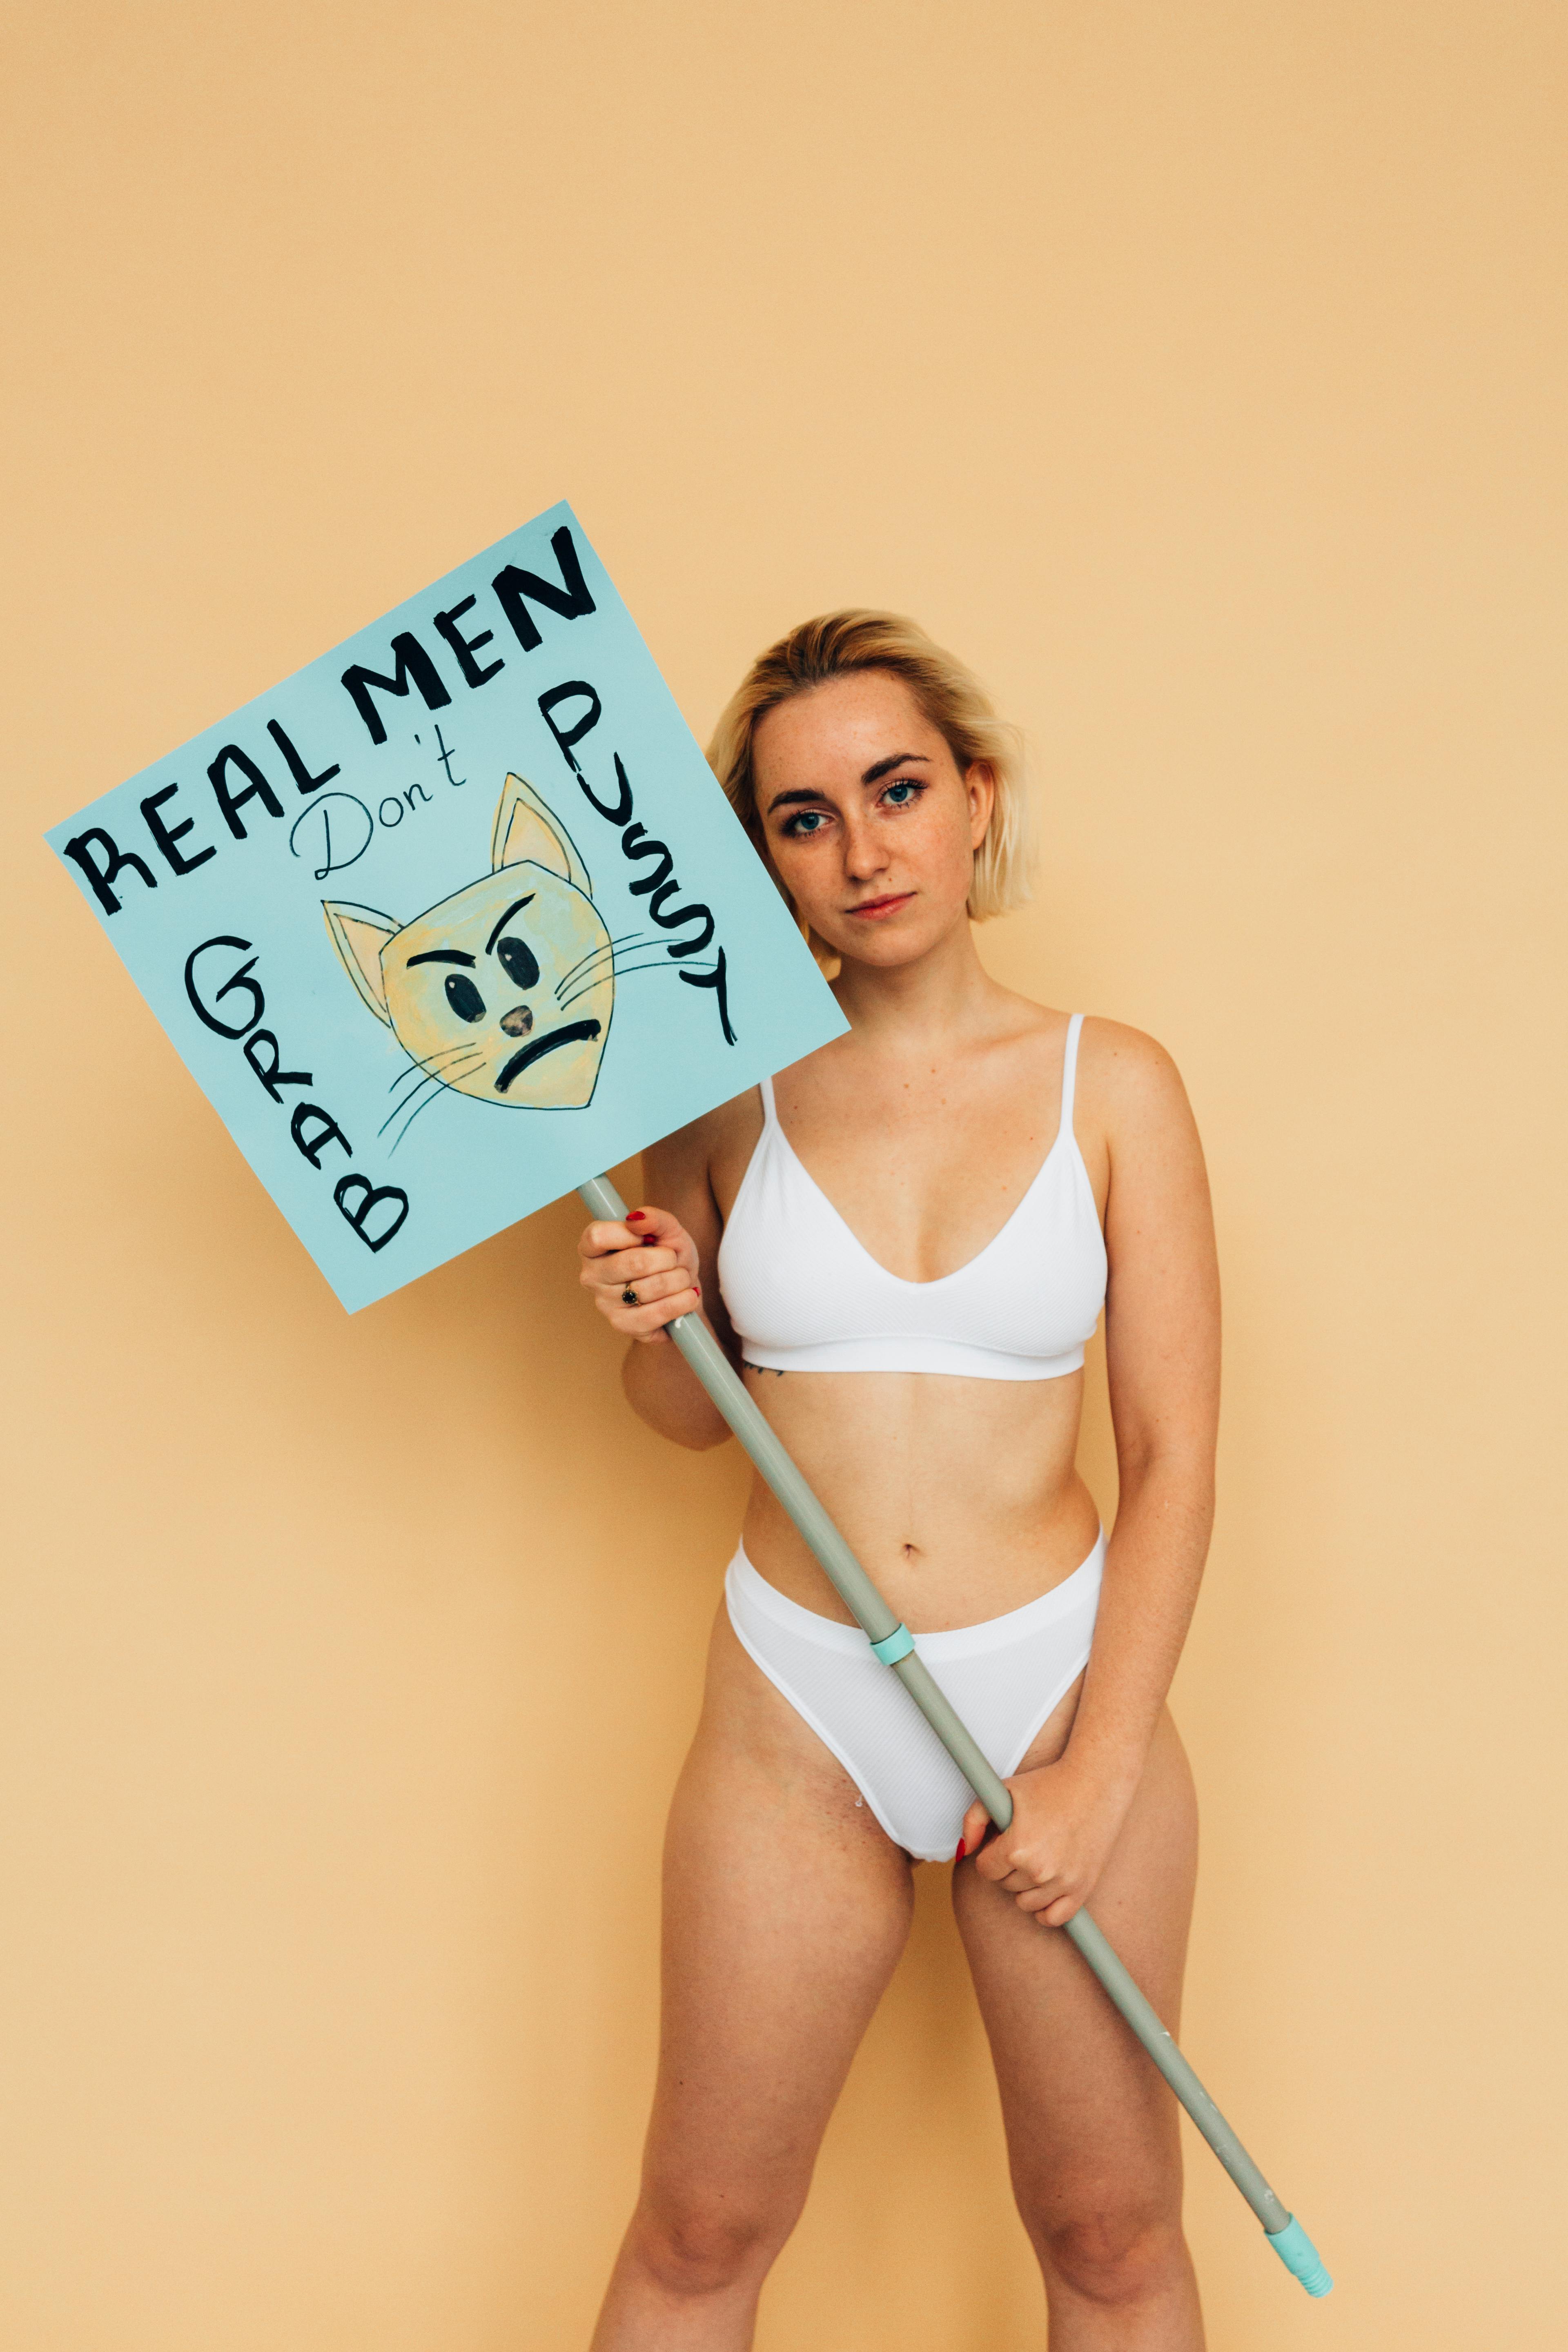 Woman Wearing Underwear Holding a Placard on Stick · Free Stock Photo